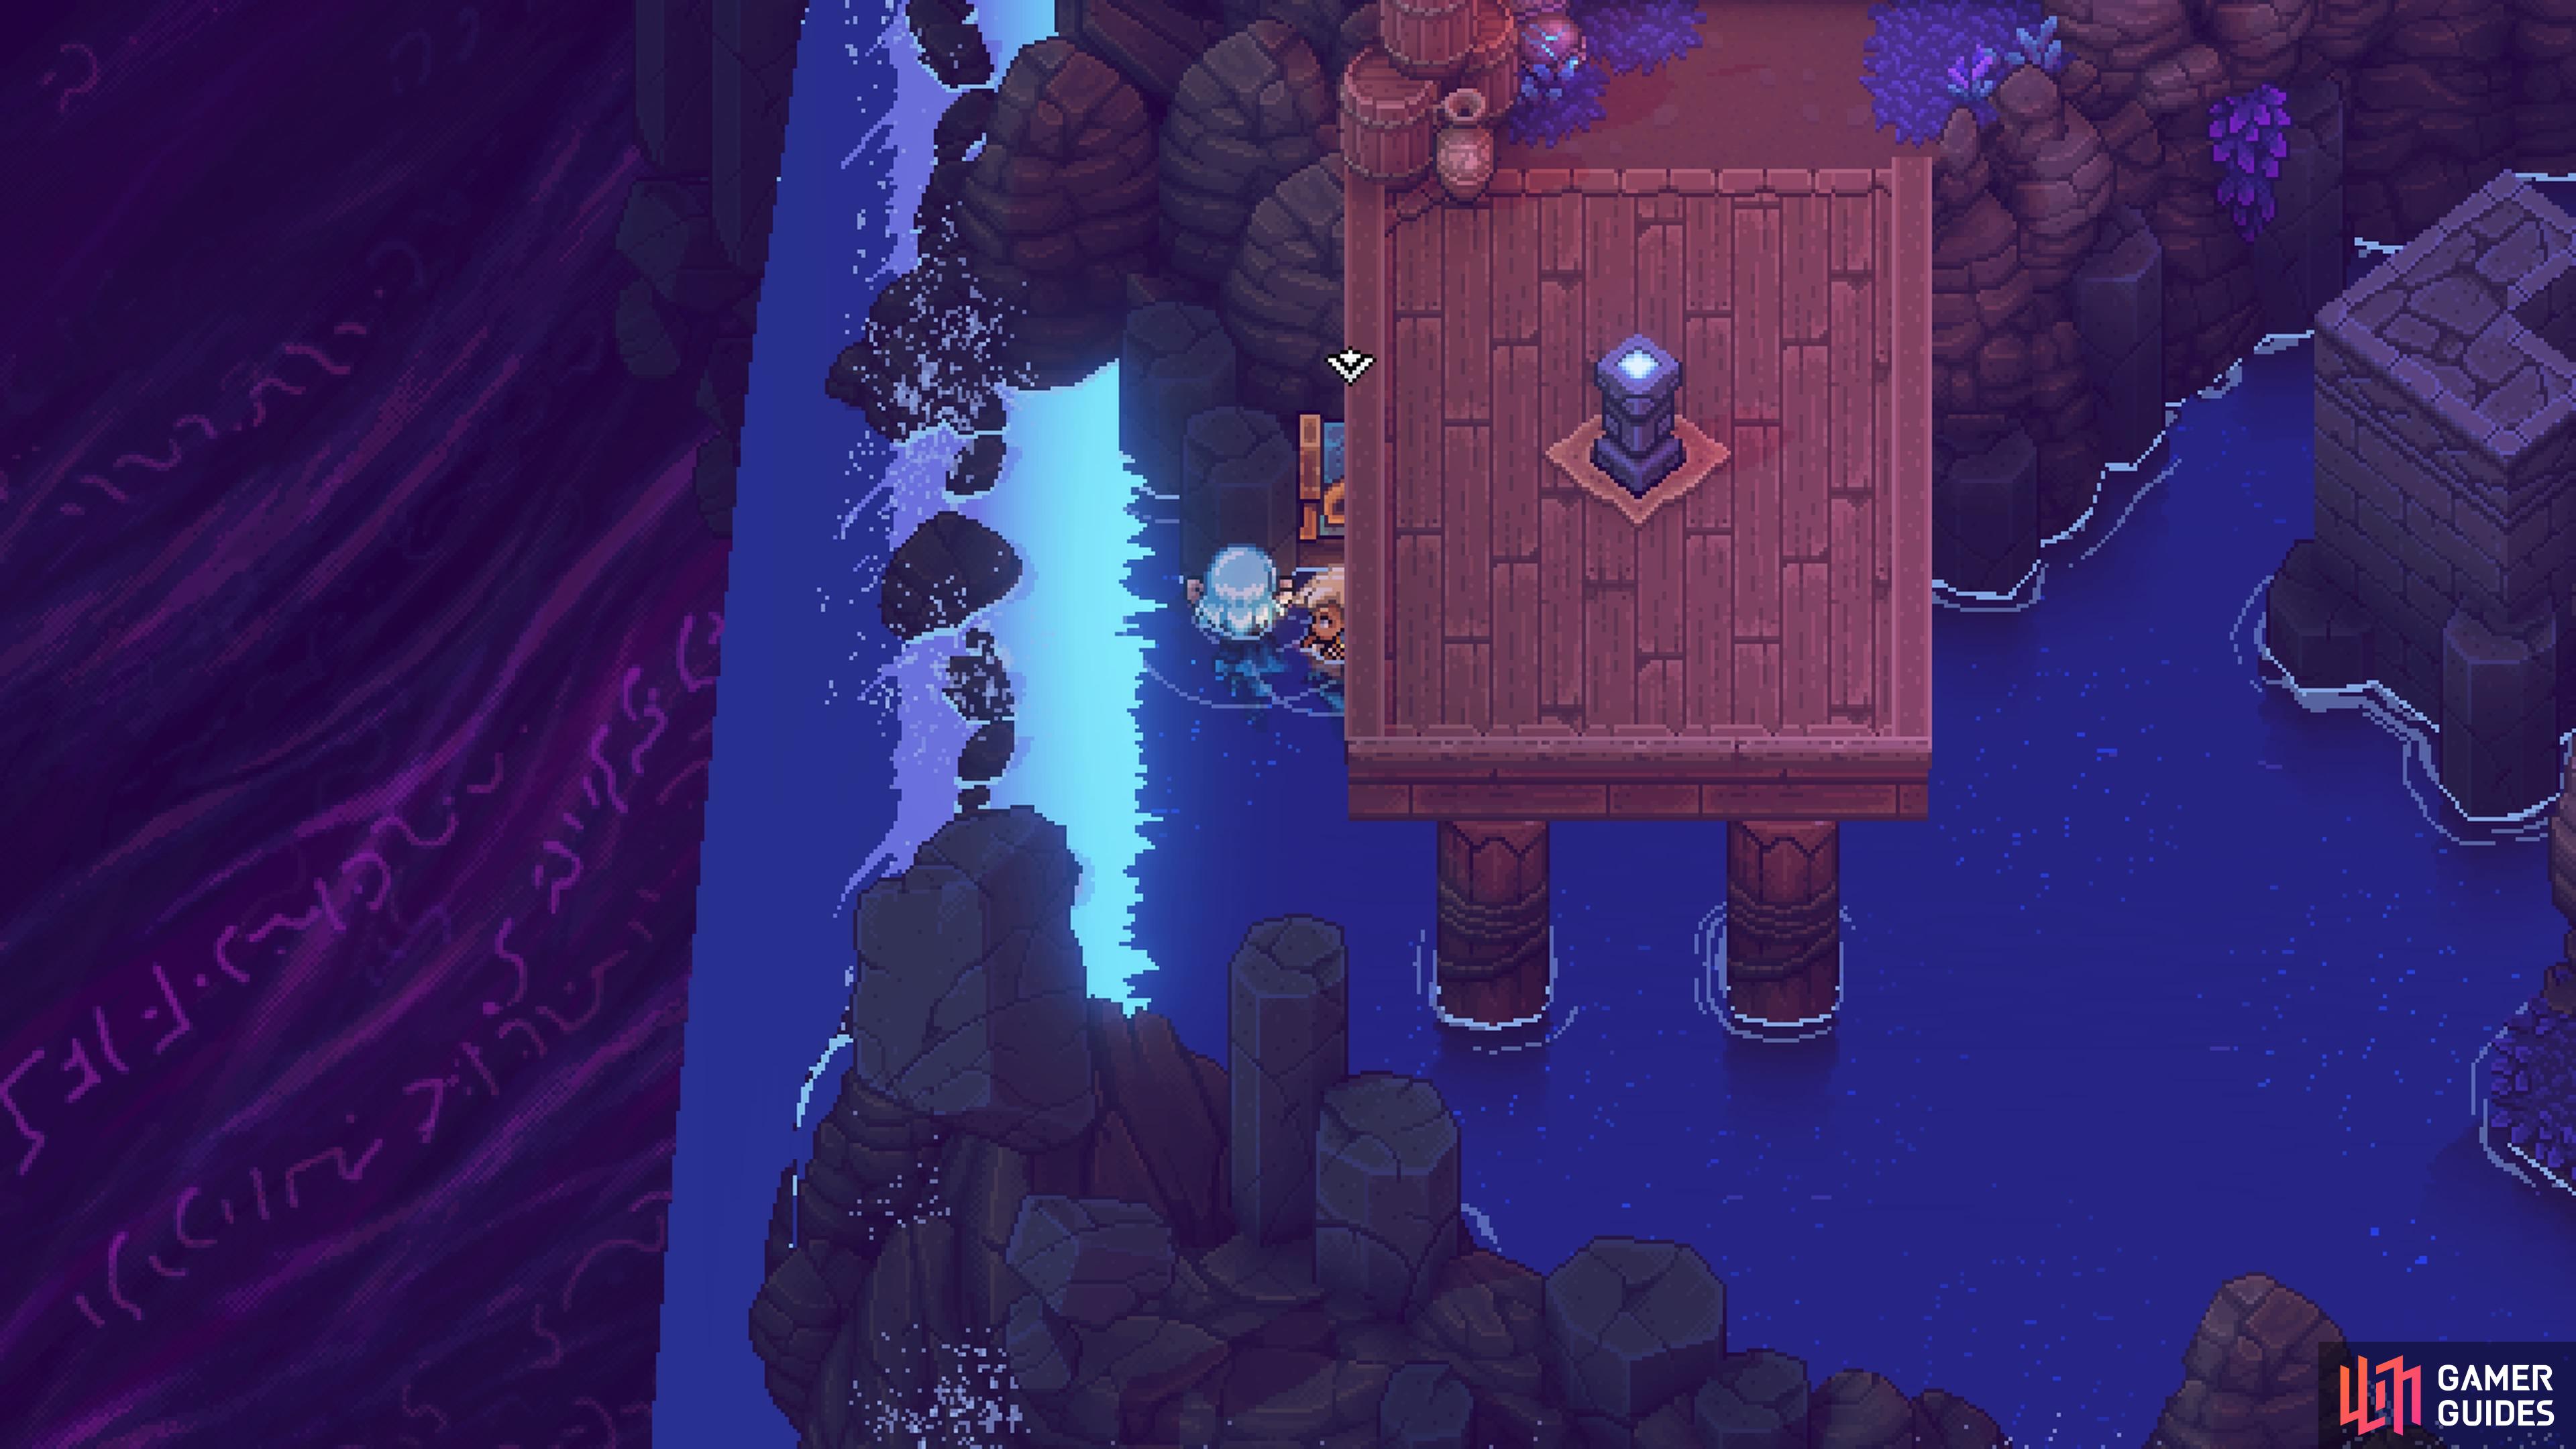 Swim underneath the pier here, in the Turquoise Room, to find a chest with a Rainbow Conch.